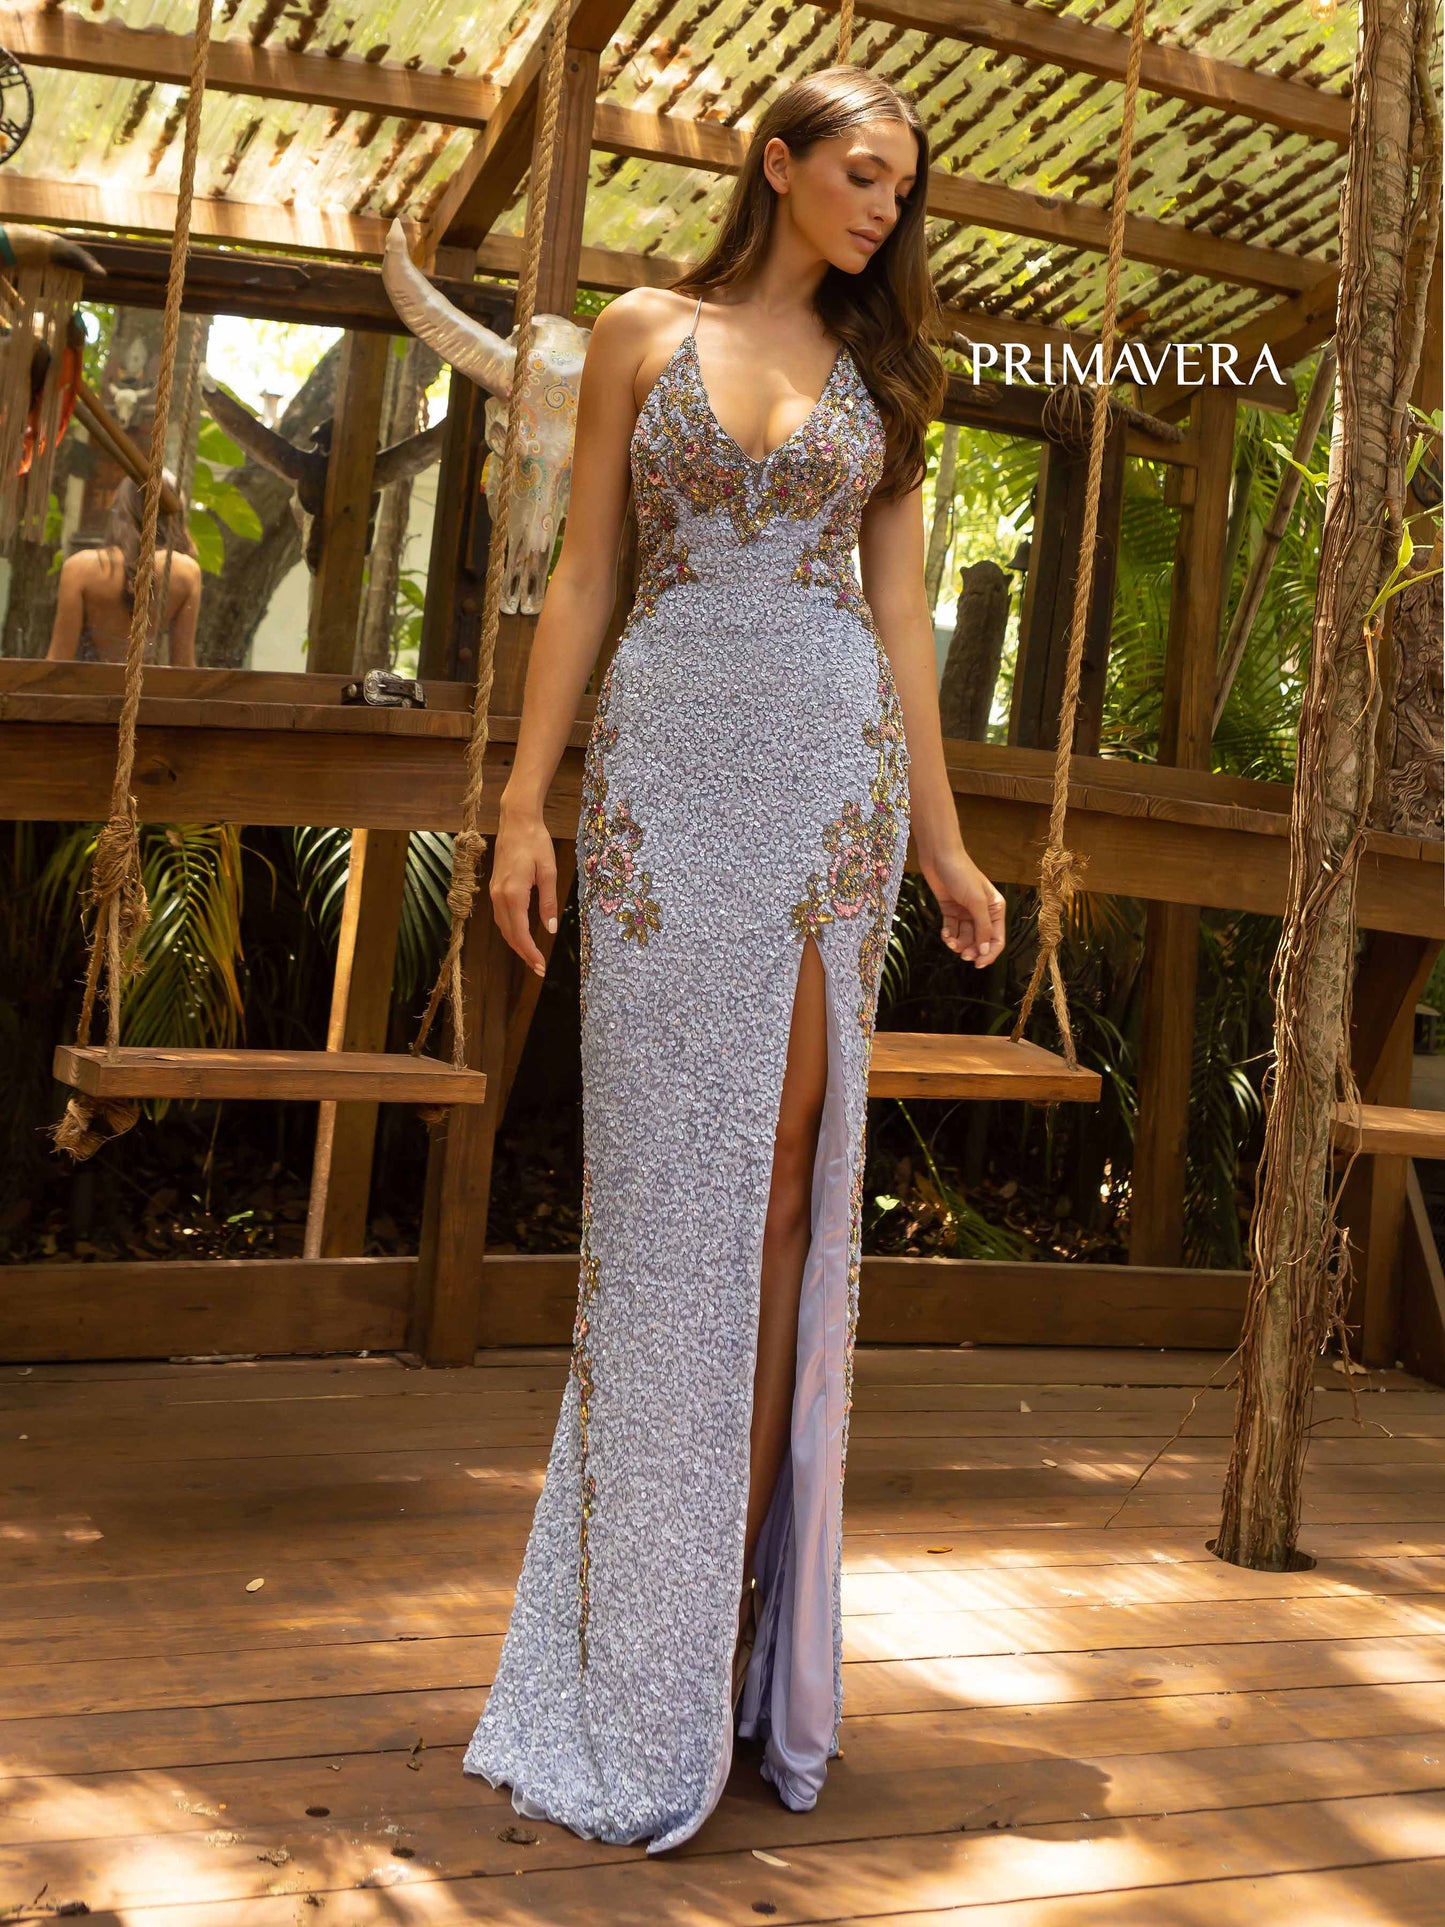 Primavera Couture 3211 Lilac  is a Long fitted sequin Embellished Formal Evening Gown. This Prom Dress Features a deep V Neck with an open Corset lace up back. Beaded & embellished elegant scroll pattern accentuate curves. Fully beaded prom dress with floral pattern and side slit. Long Sequin Gown featuring a v neckline. slit in the fitted skirt, Slit in Thigh. Stunning Pageant Dress, Prom Gown & More! front